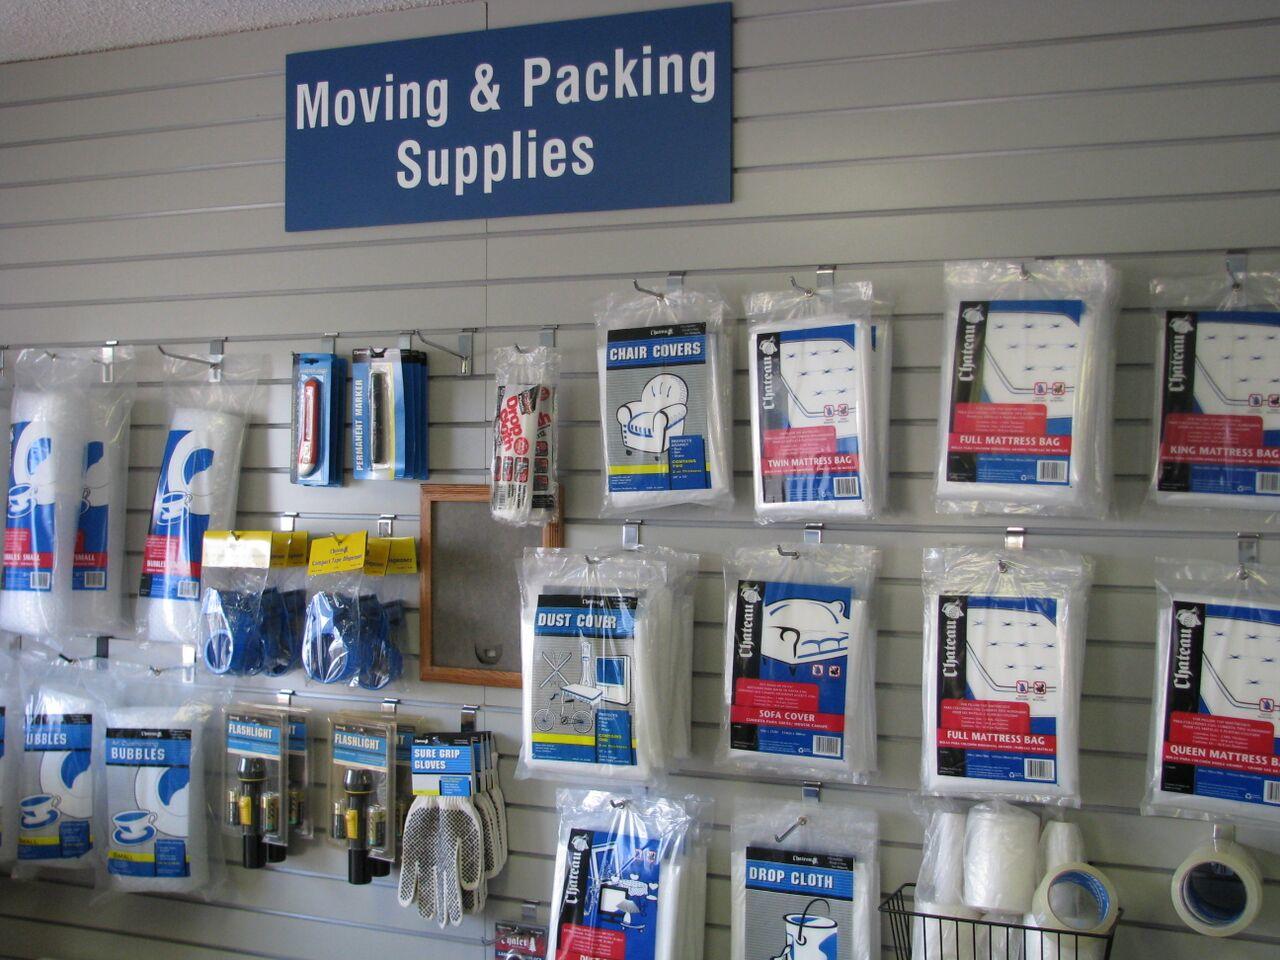 Packing and Moving Supplies for sale on site. Mini U Storage Atascadero (805)466-8860